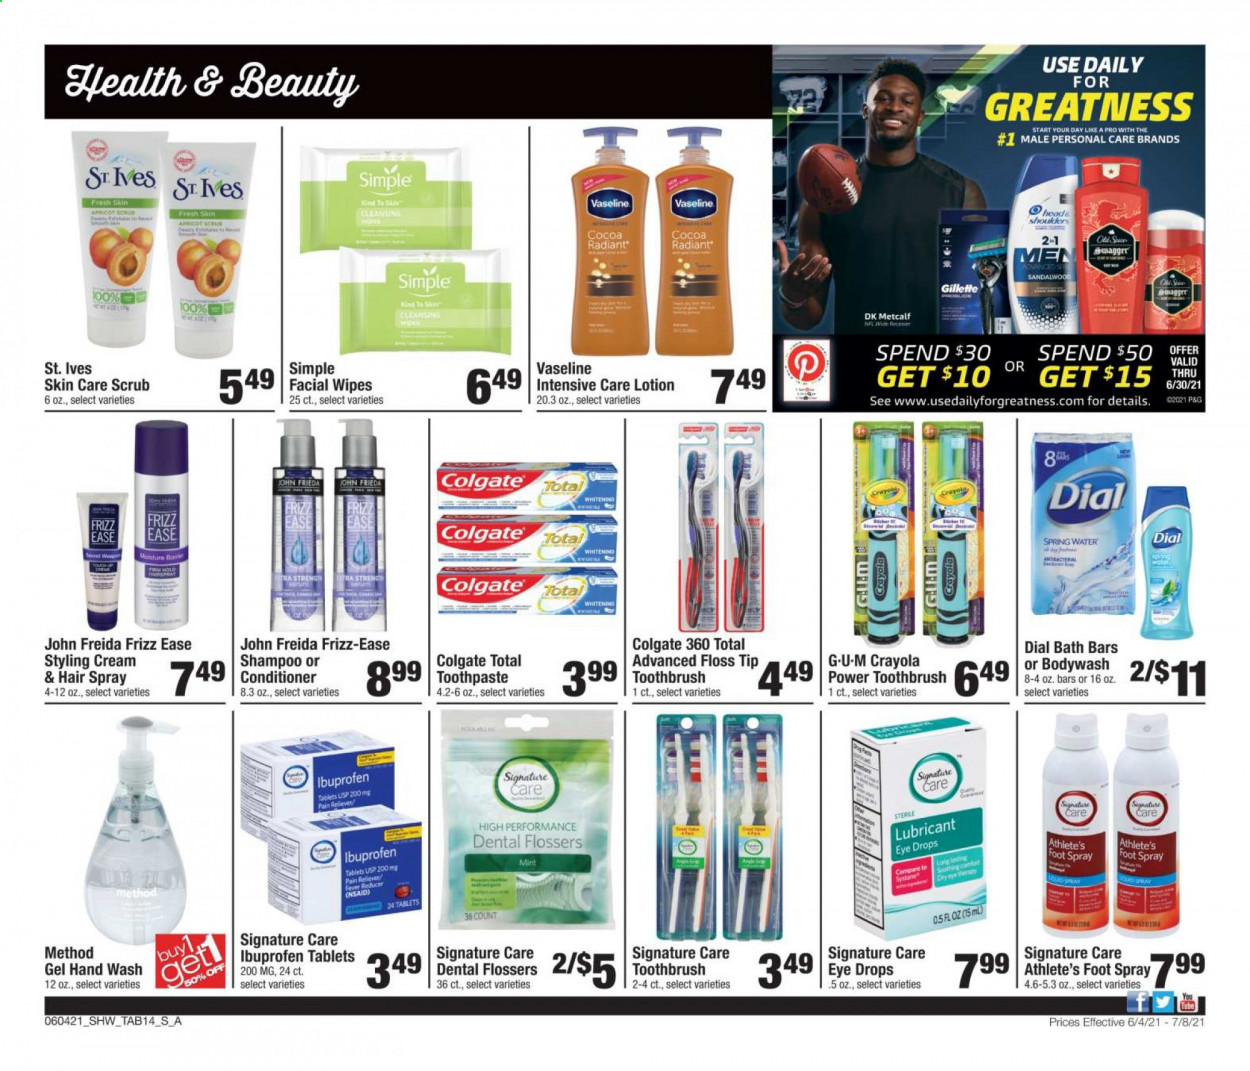 thumbnail - Shaw’s Flyer - 06/04/2021 - 07/08/2021 - Sales products - spice, spring water, wipes, shampoo, Old Spice, hand wash, Vaseline, Dial, Colgate, toothbrush, toothpaste, conditioner, John Frieda, body lotion, Gillette, crayons, lubricant, Systane, Ibuprofen, eye drops. Page 14.